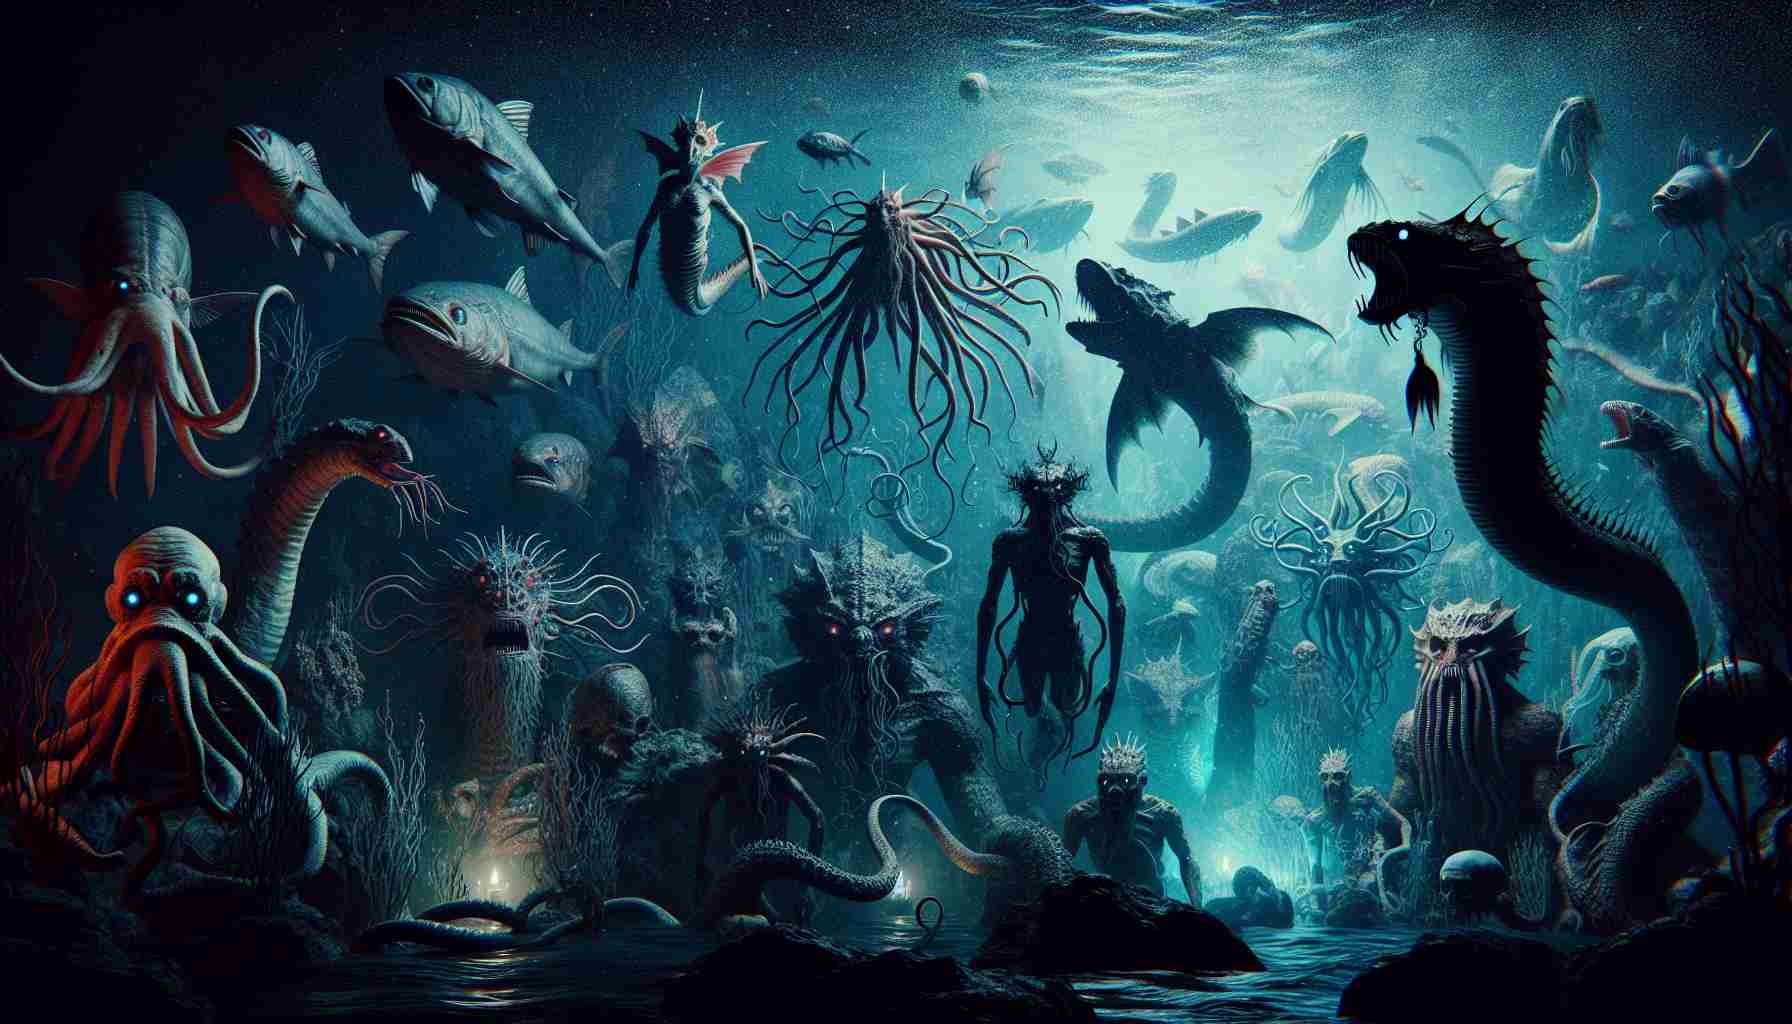 Generate a realistic, high-definition image featuring a variety of mythical sea creatures living in the dark abyss of the ocean. The setting is mysterious and haunting, with numerous aquatic beasts of folklore and mythology, each uniquely eerie and fascinating. Include creatures such as serpents, mermaids, krakens, and other legendary maritime entities. Lighting should be minimal, making use of eerie bioluminescent glow from the creatures themselves or the occasional submerged ruin.